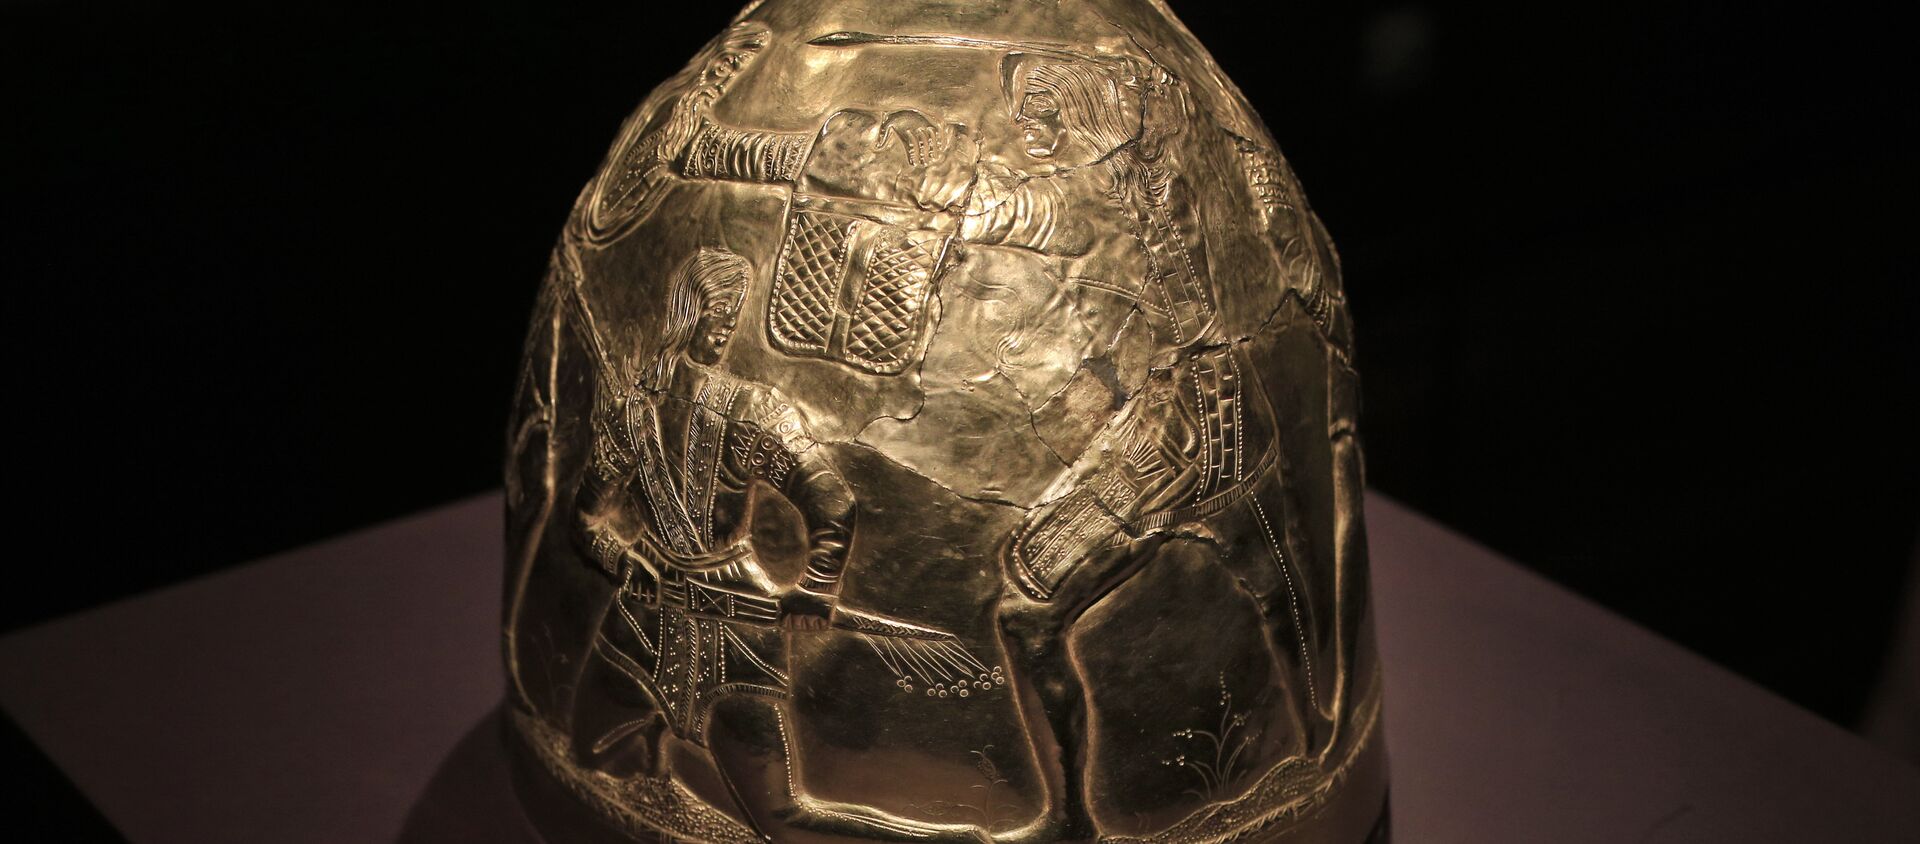 A Scythian gold helmet from the fourth century B.C. is displayed as part of the exhibit called The Crimea - Gold and Secrets of the Black Sea, at Allard Pierson historical museum in Amsterdam Friday April 4, 2014 - Sputnik International, 1920, 25.11.2020